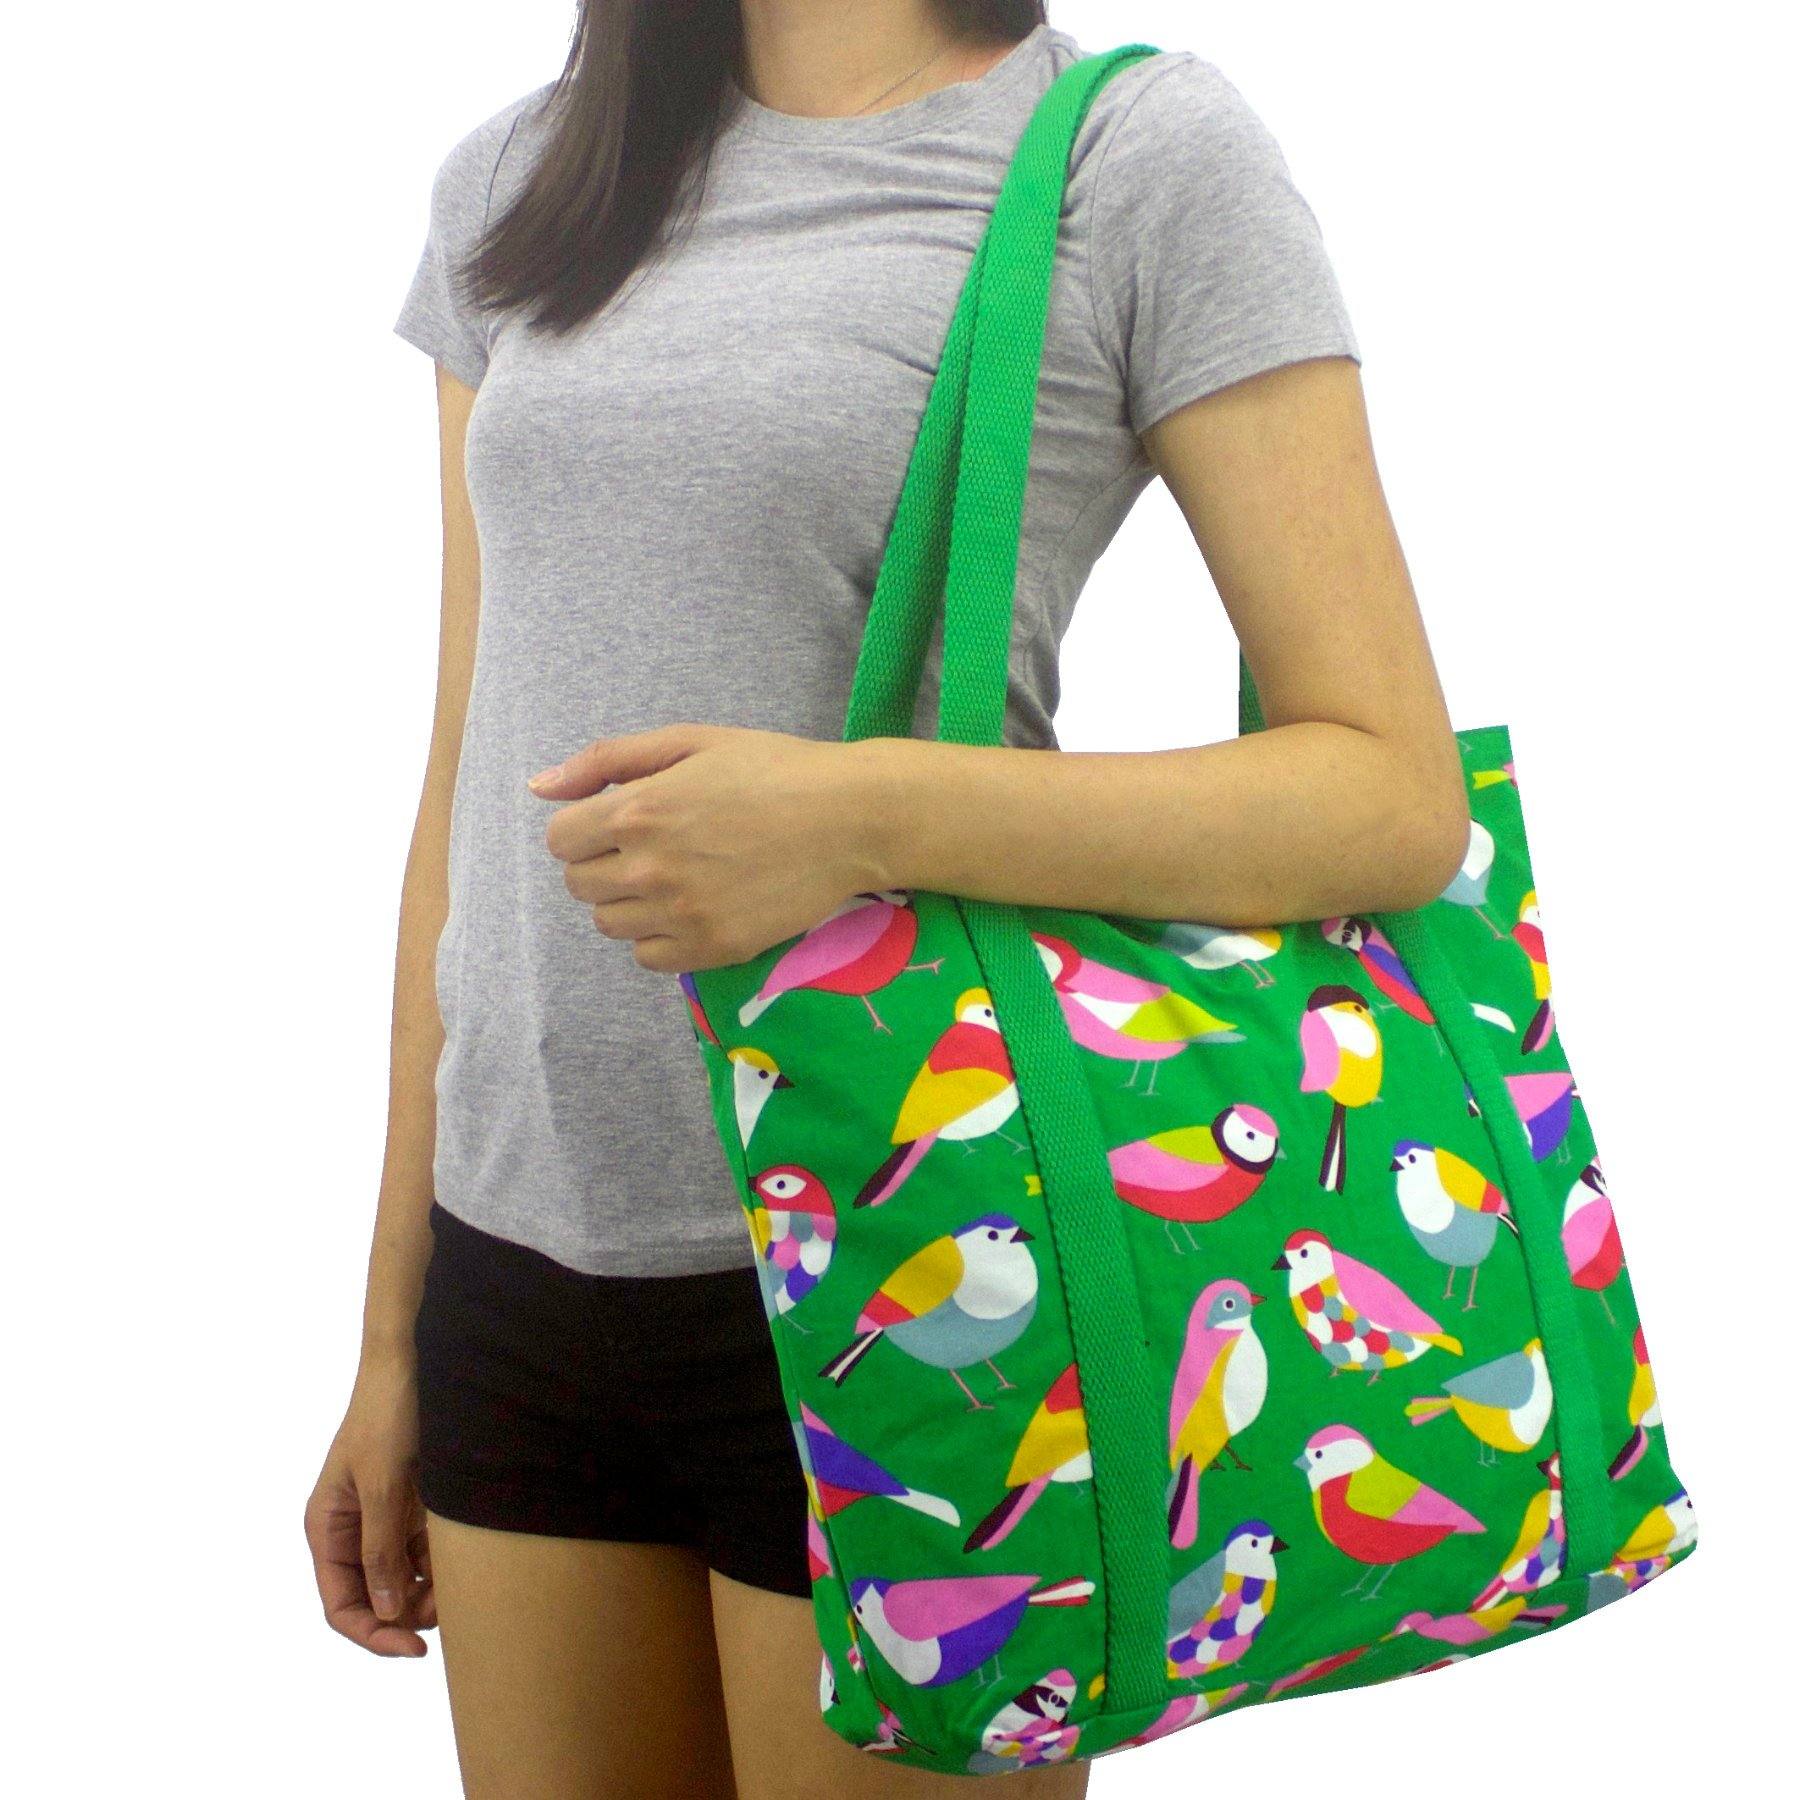 Colorful Bird All Over Print Large Capacity Grocery Shopper Tote Bag in Green